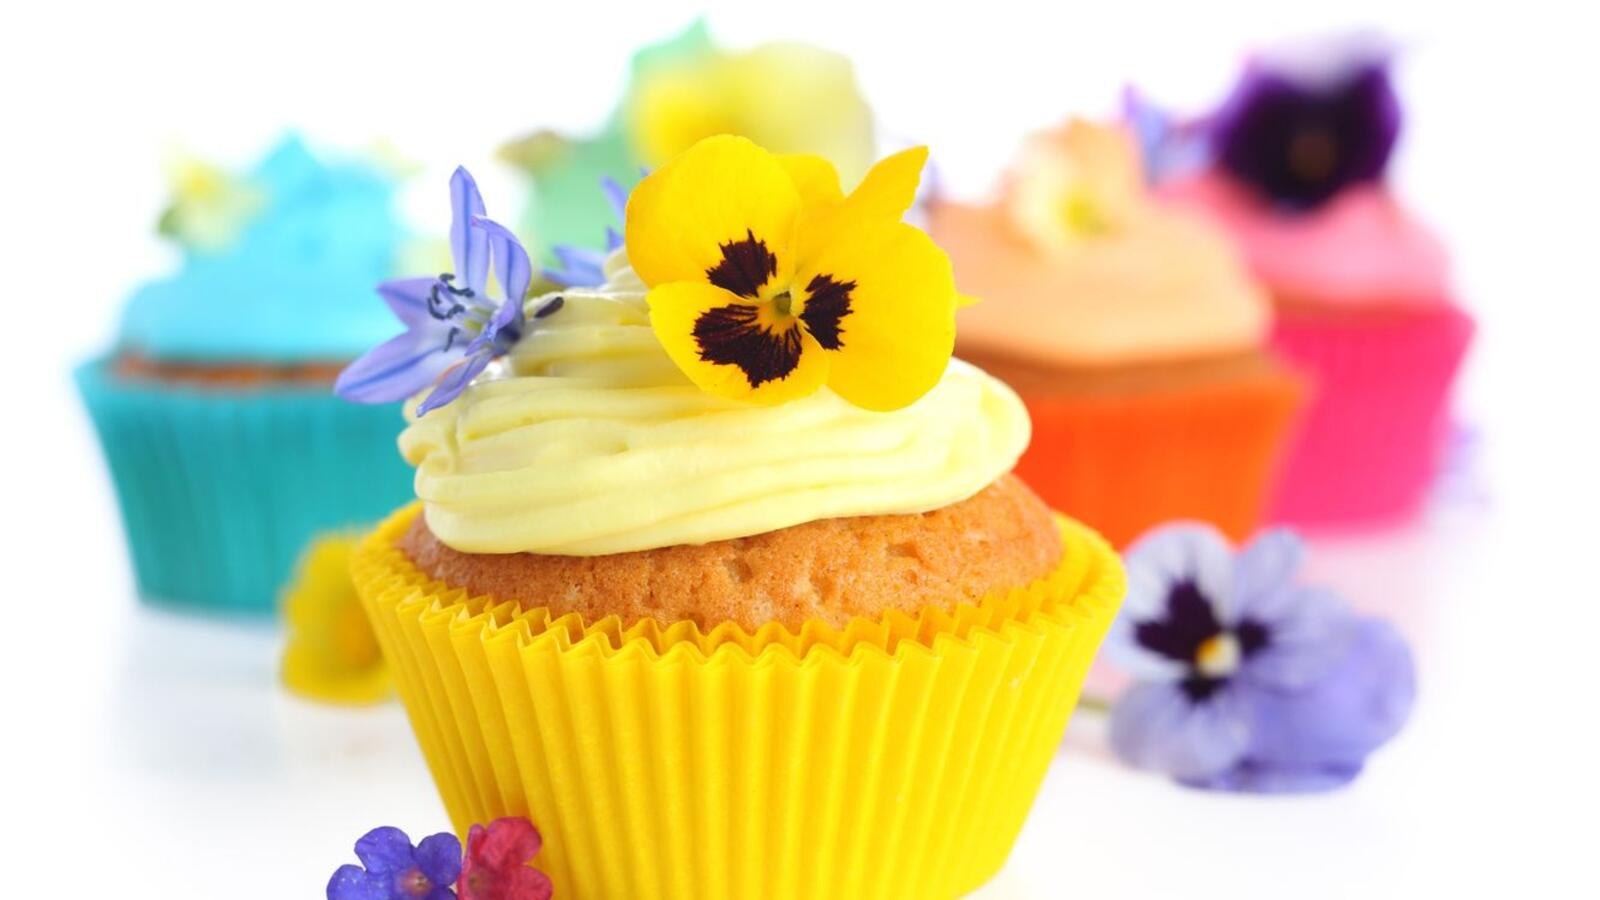 Wallpapers decoration pastry cupcakes on the desktop